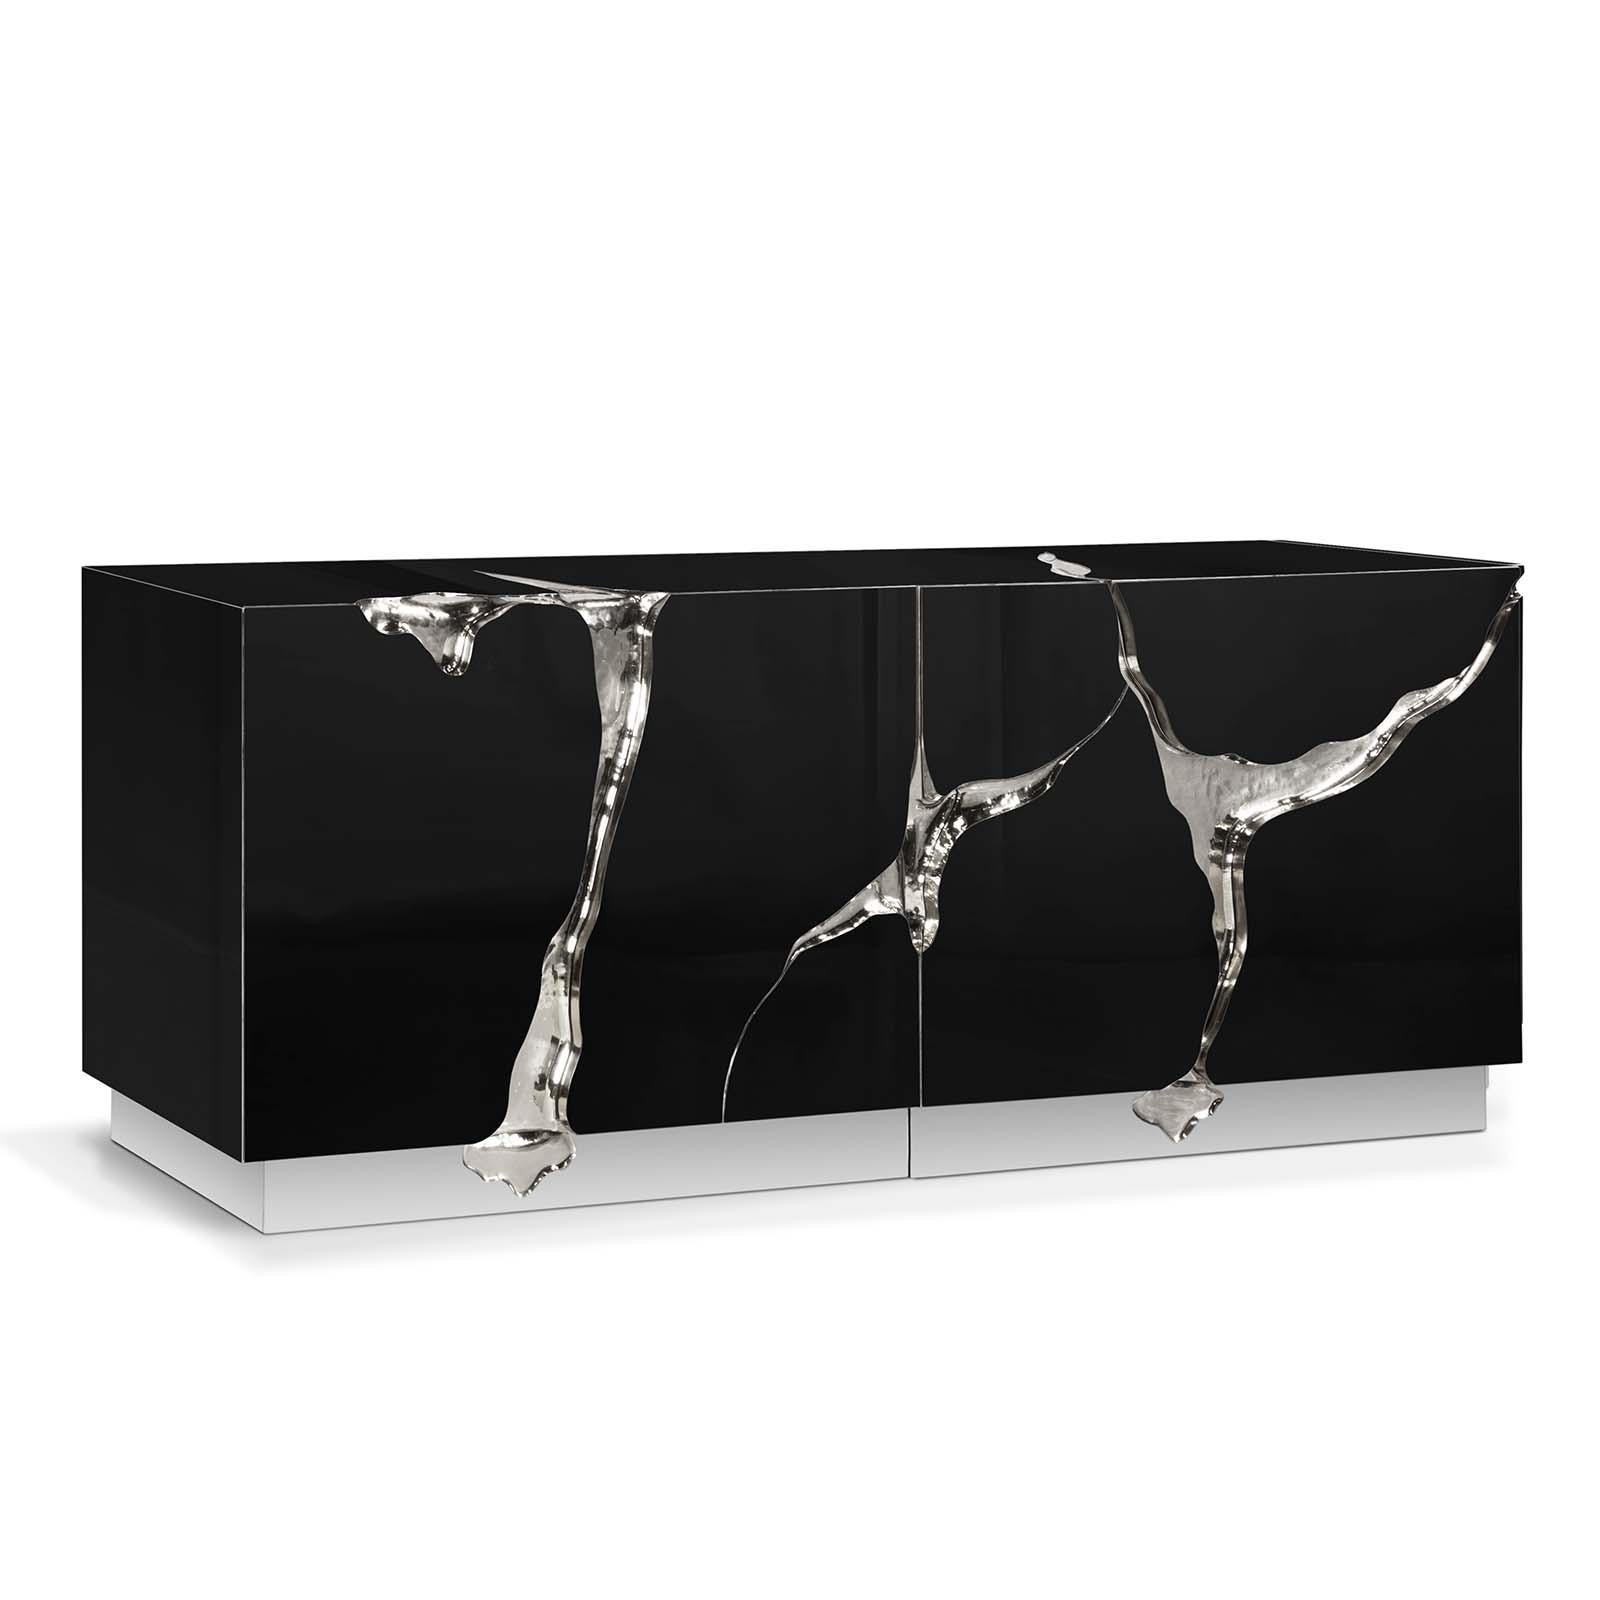 Sideboard paradise in silver finish with wood carving 
structure with details finished in polished steel in silver
finish. Coated with polished stainless steel. Inside in
poplar wood veener. Exceptional piece.